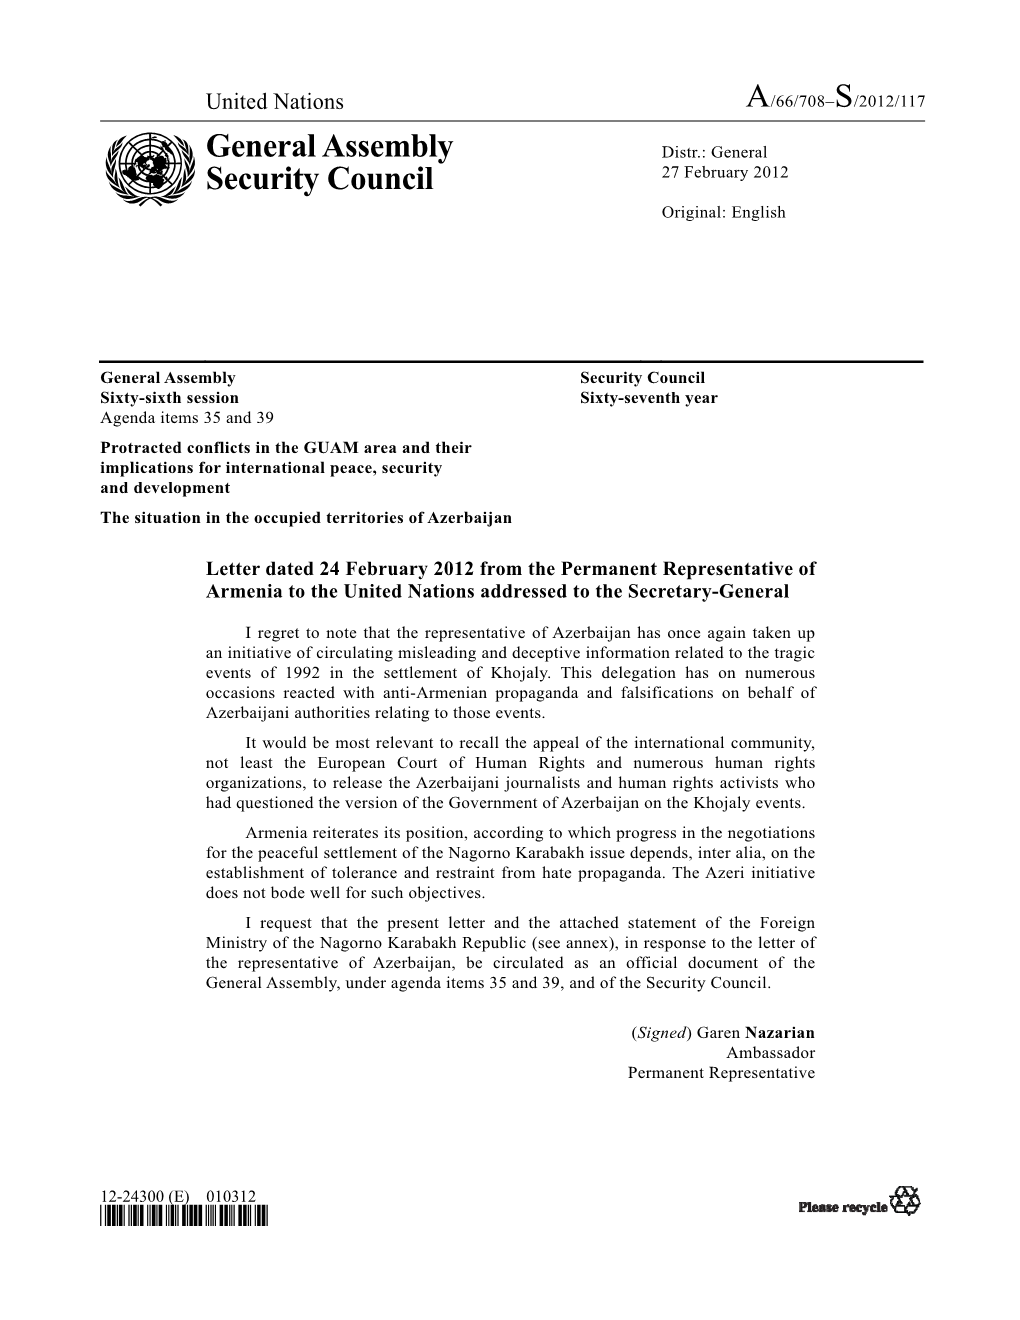 A/66/708–S/2012/117 General Assembly Security Council